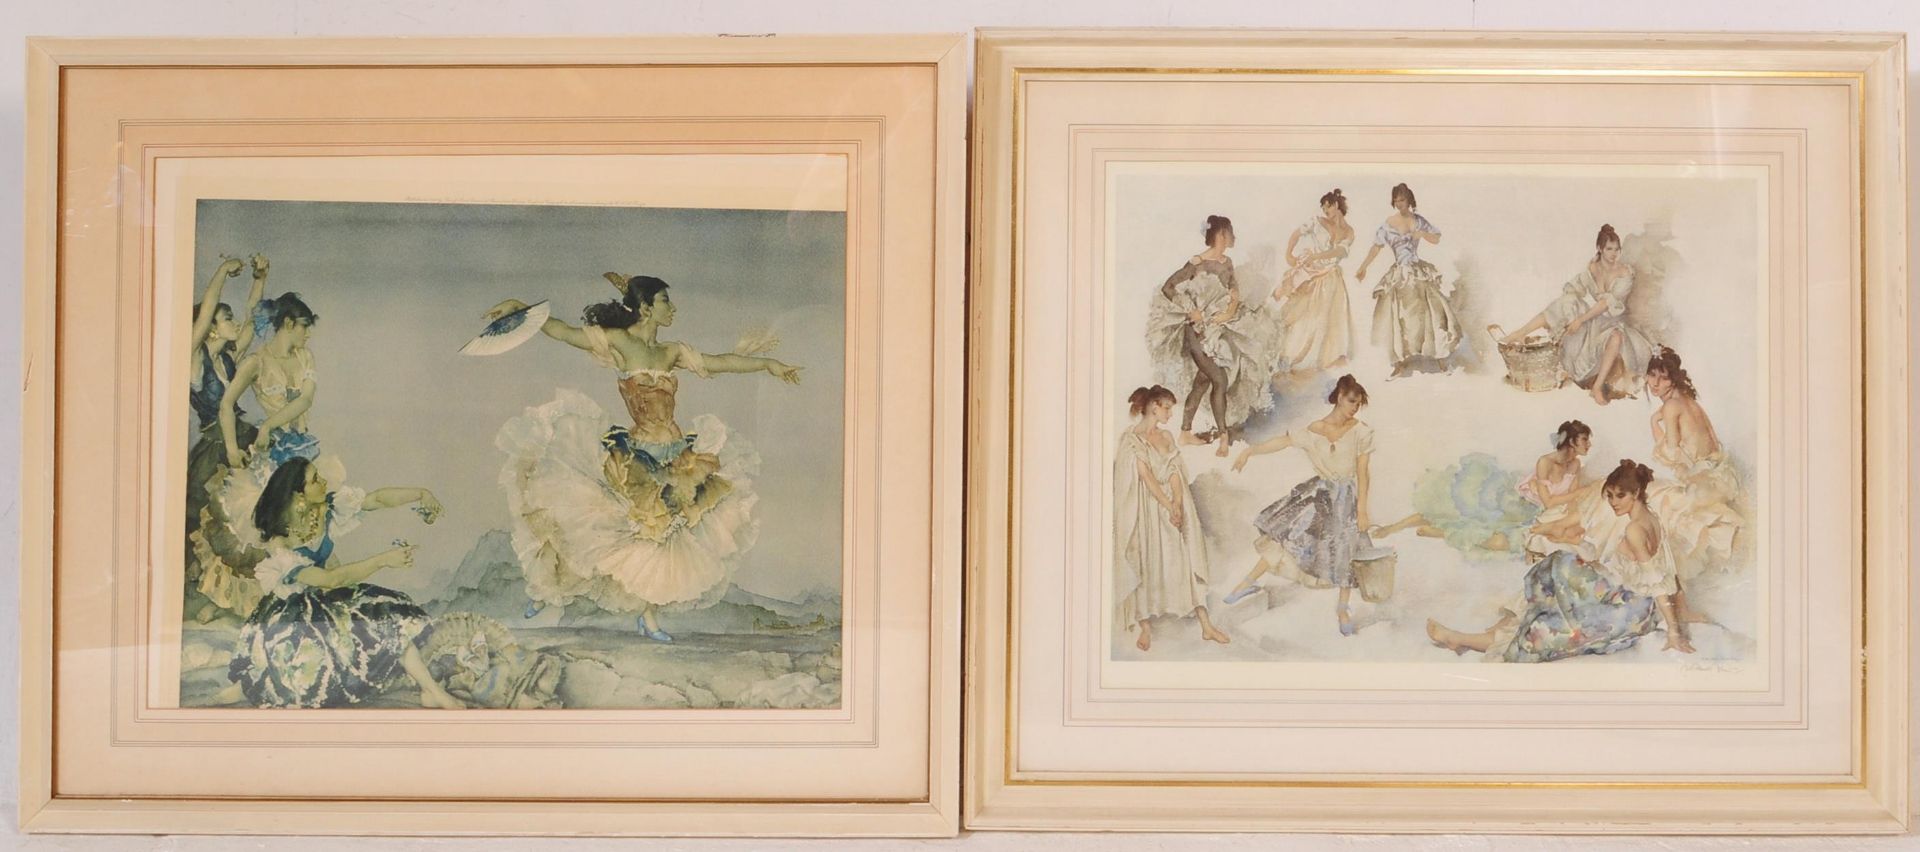 SIR WILLIAM RUSSELL FLINT - TWO SIGNED PRINTS OF DANCERS